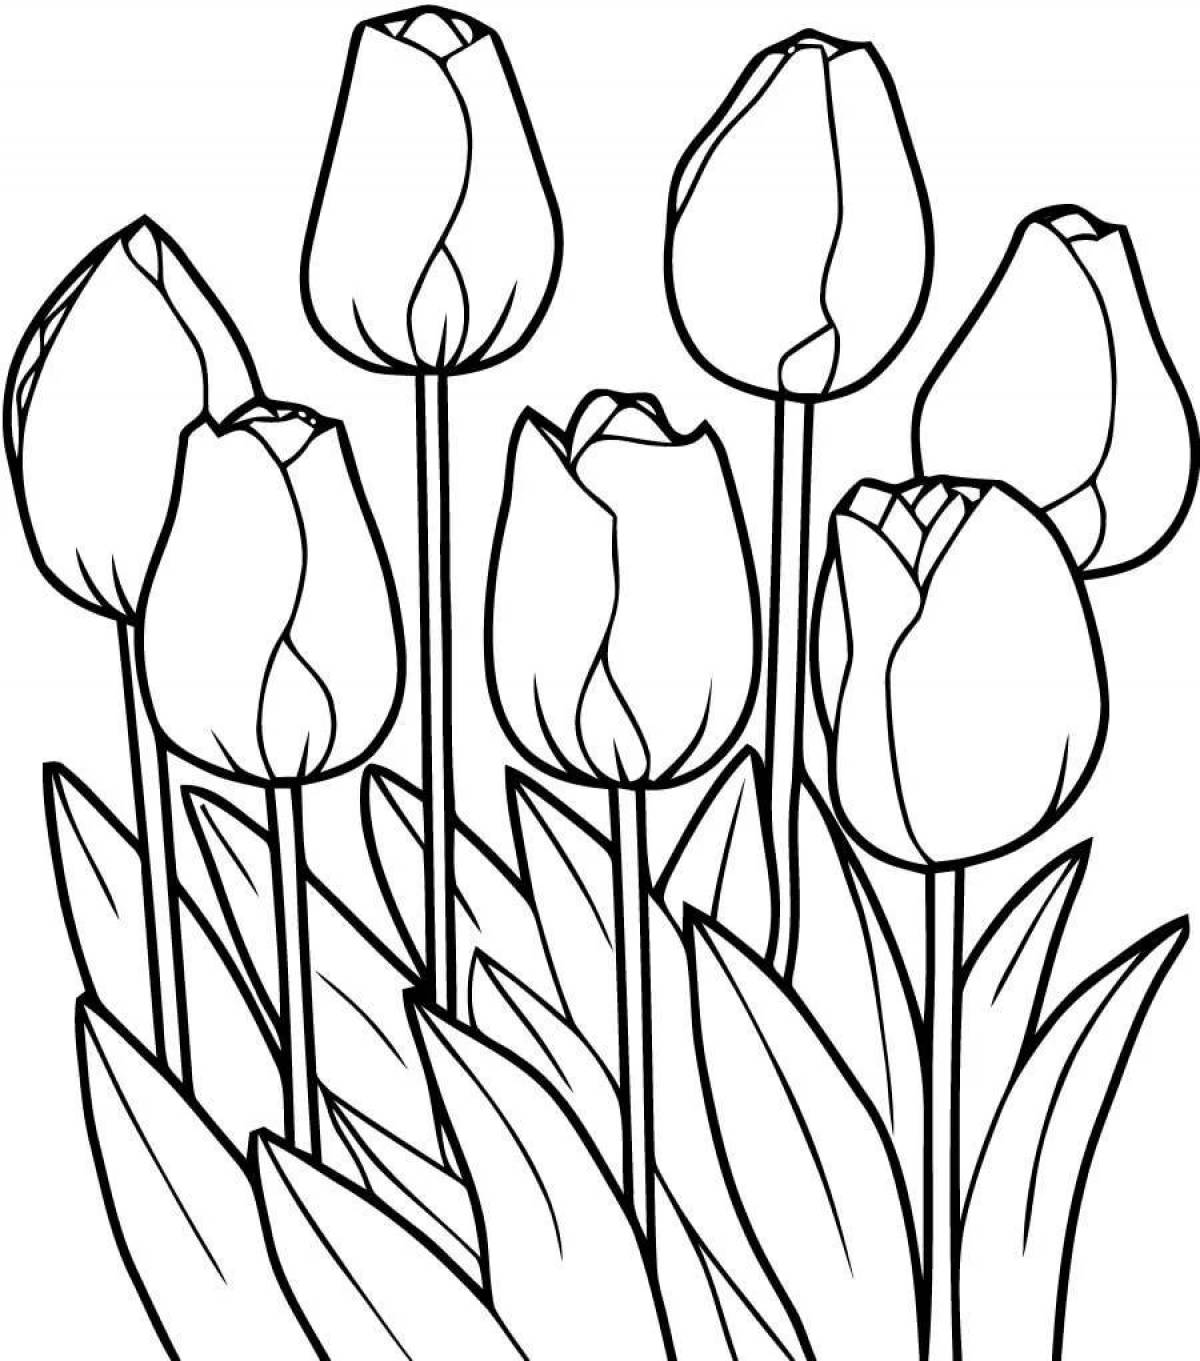 Blissful tulips coloring book for children 3-4 years old